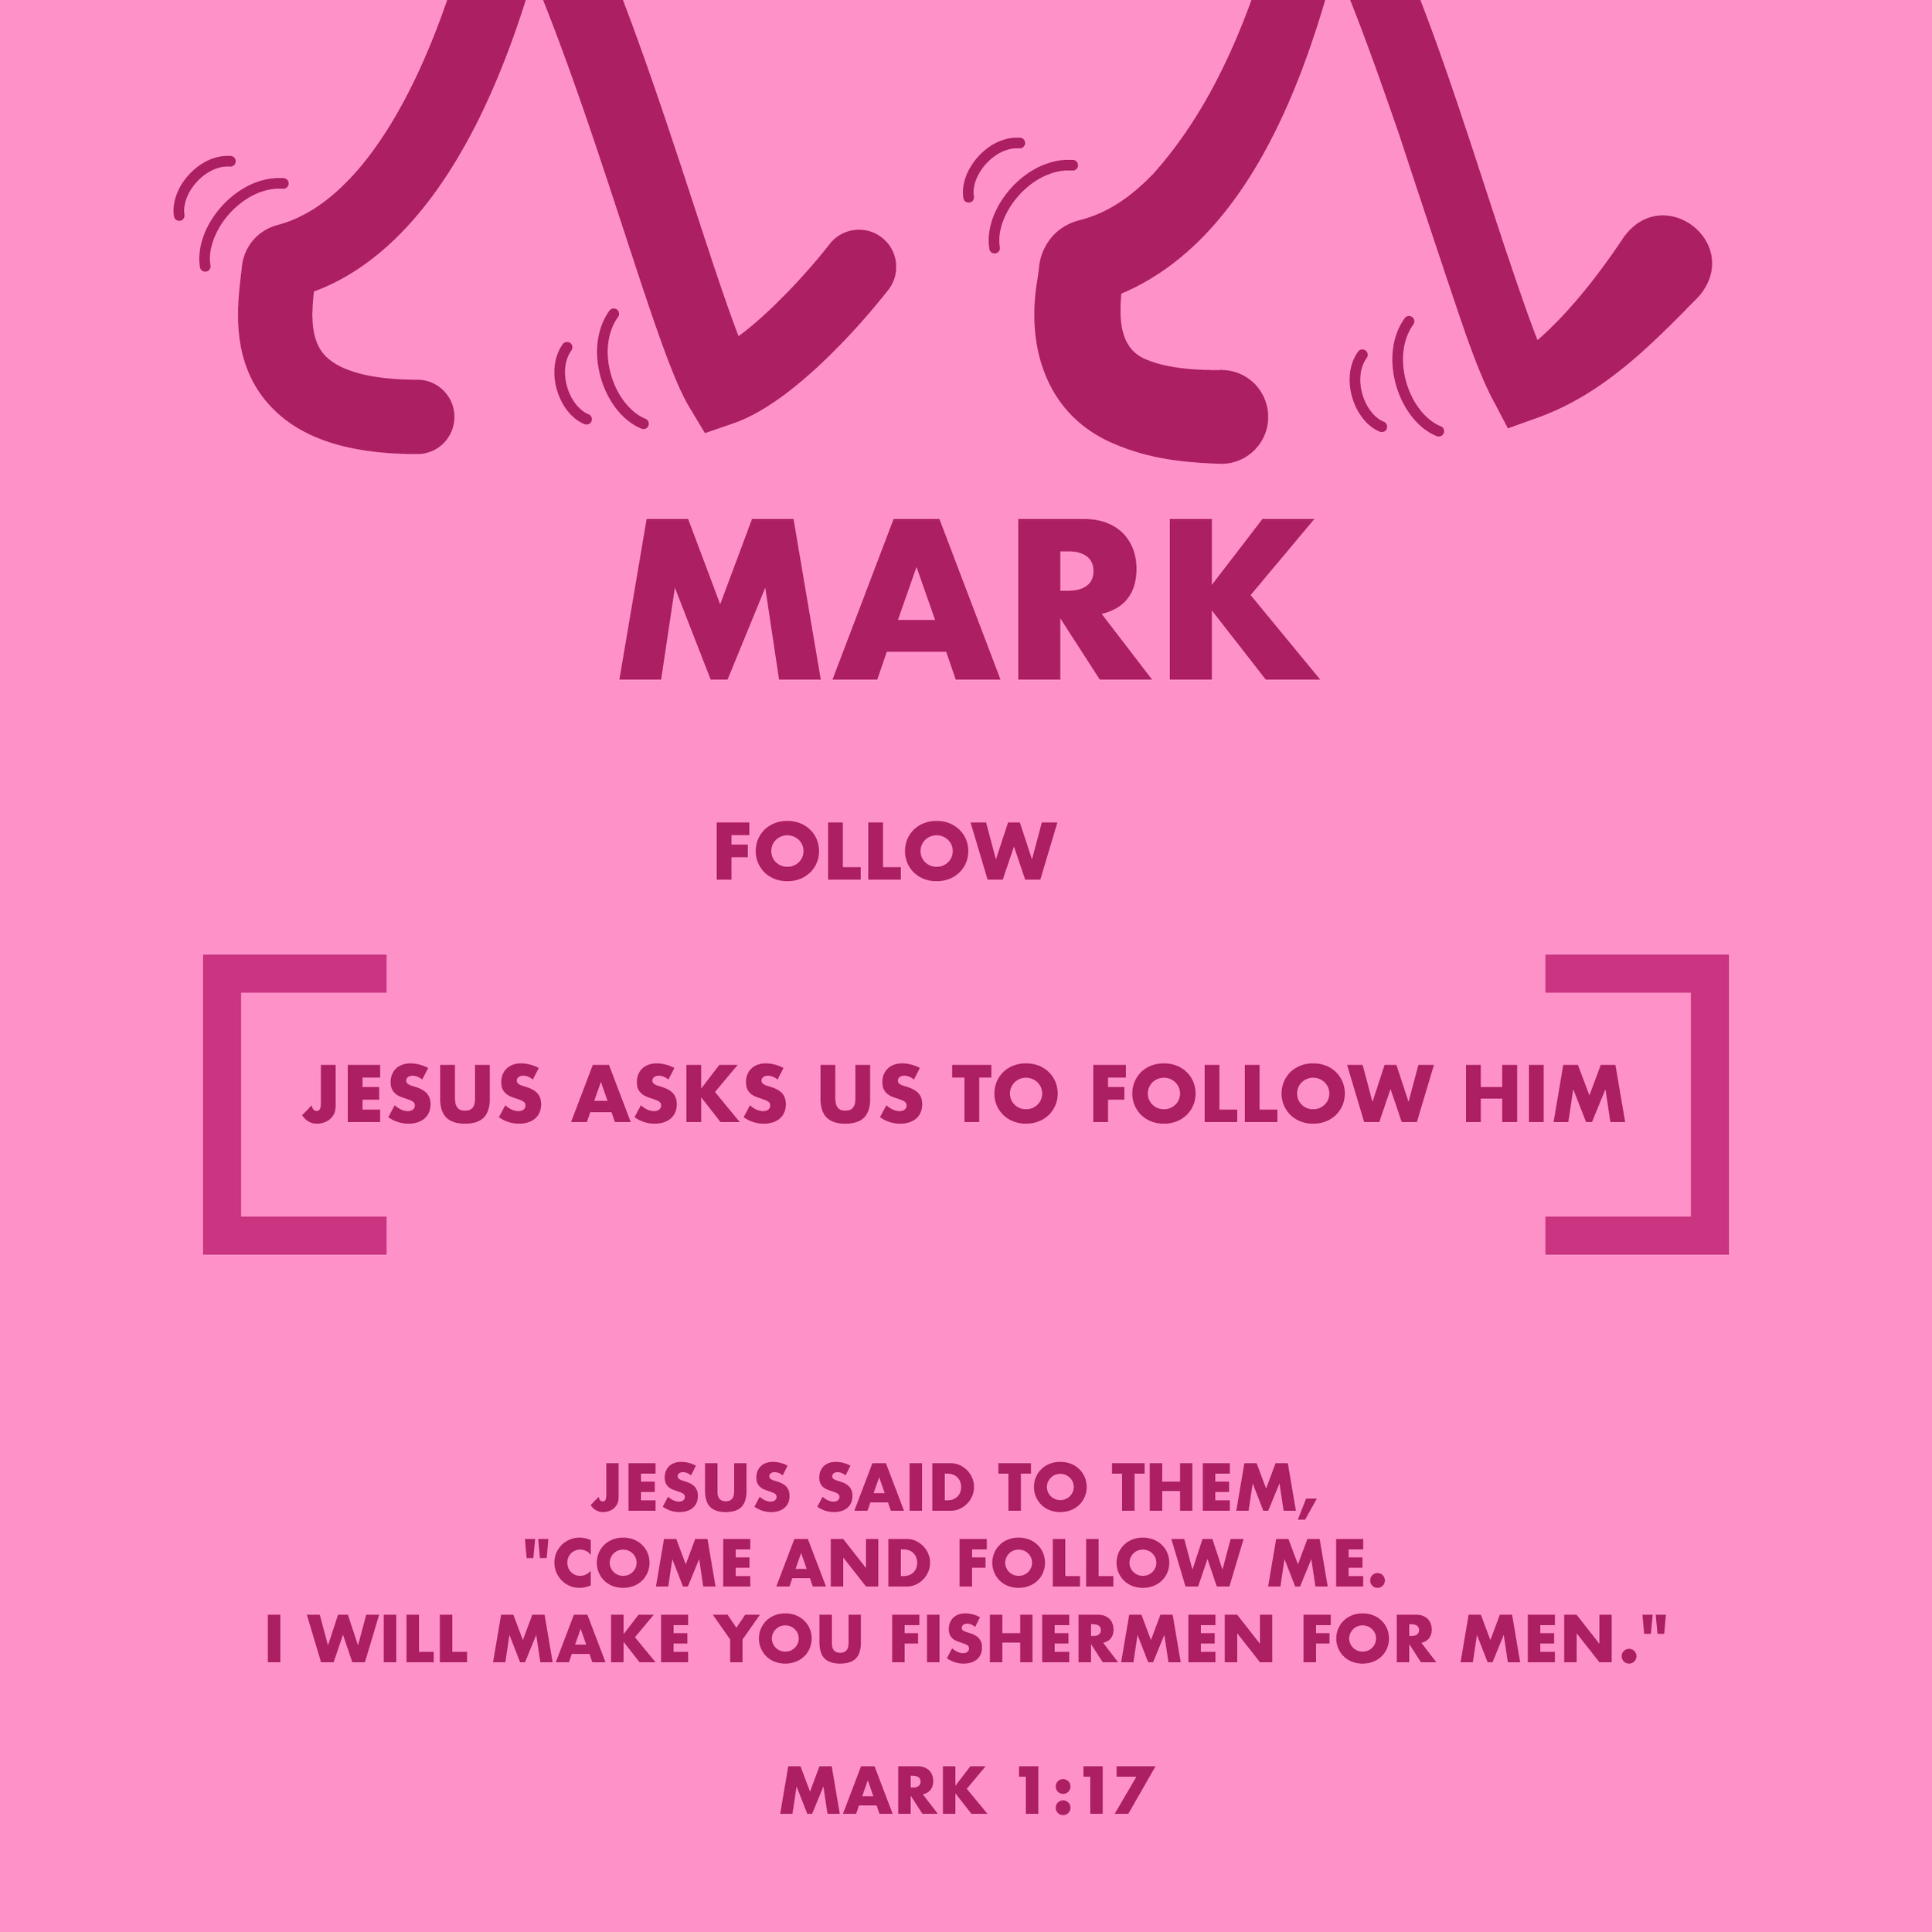 Books of the Bible_posters_39 Mark.png